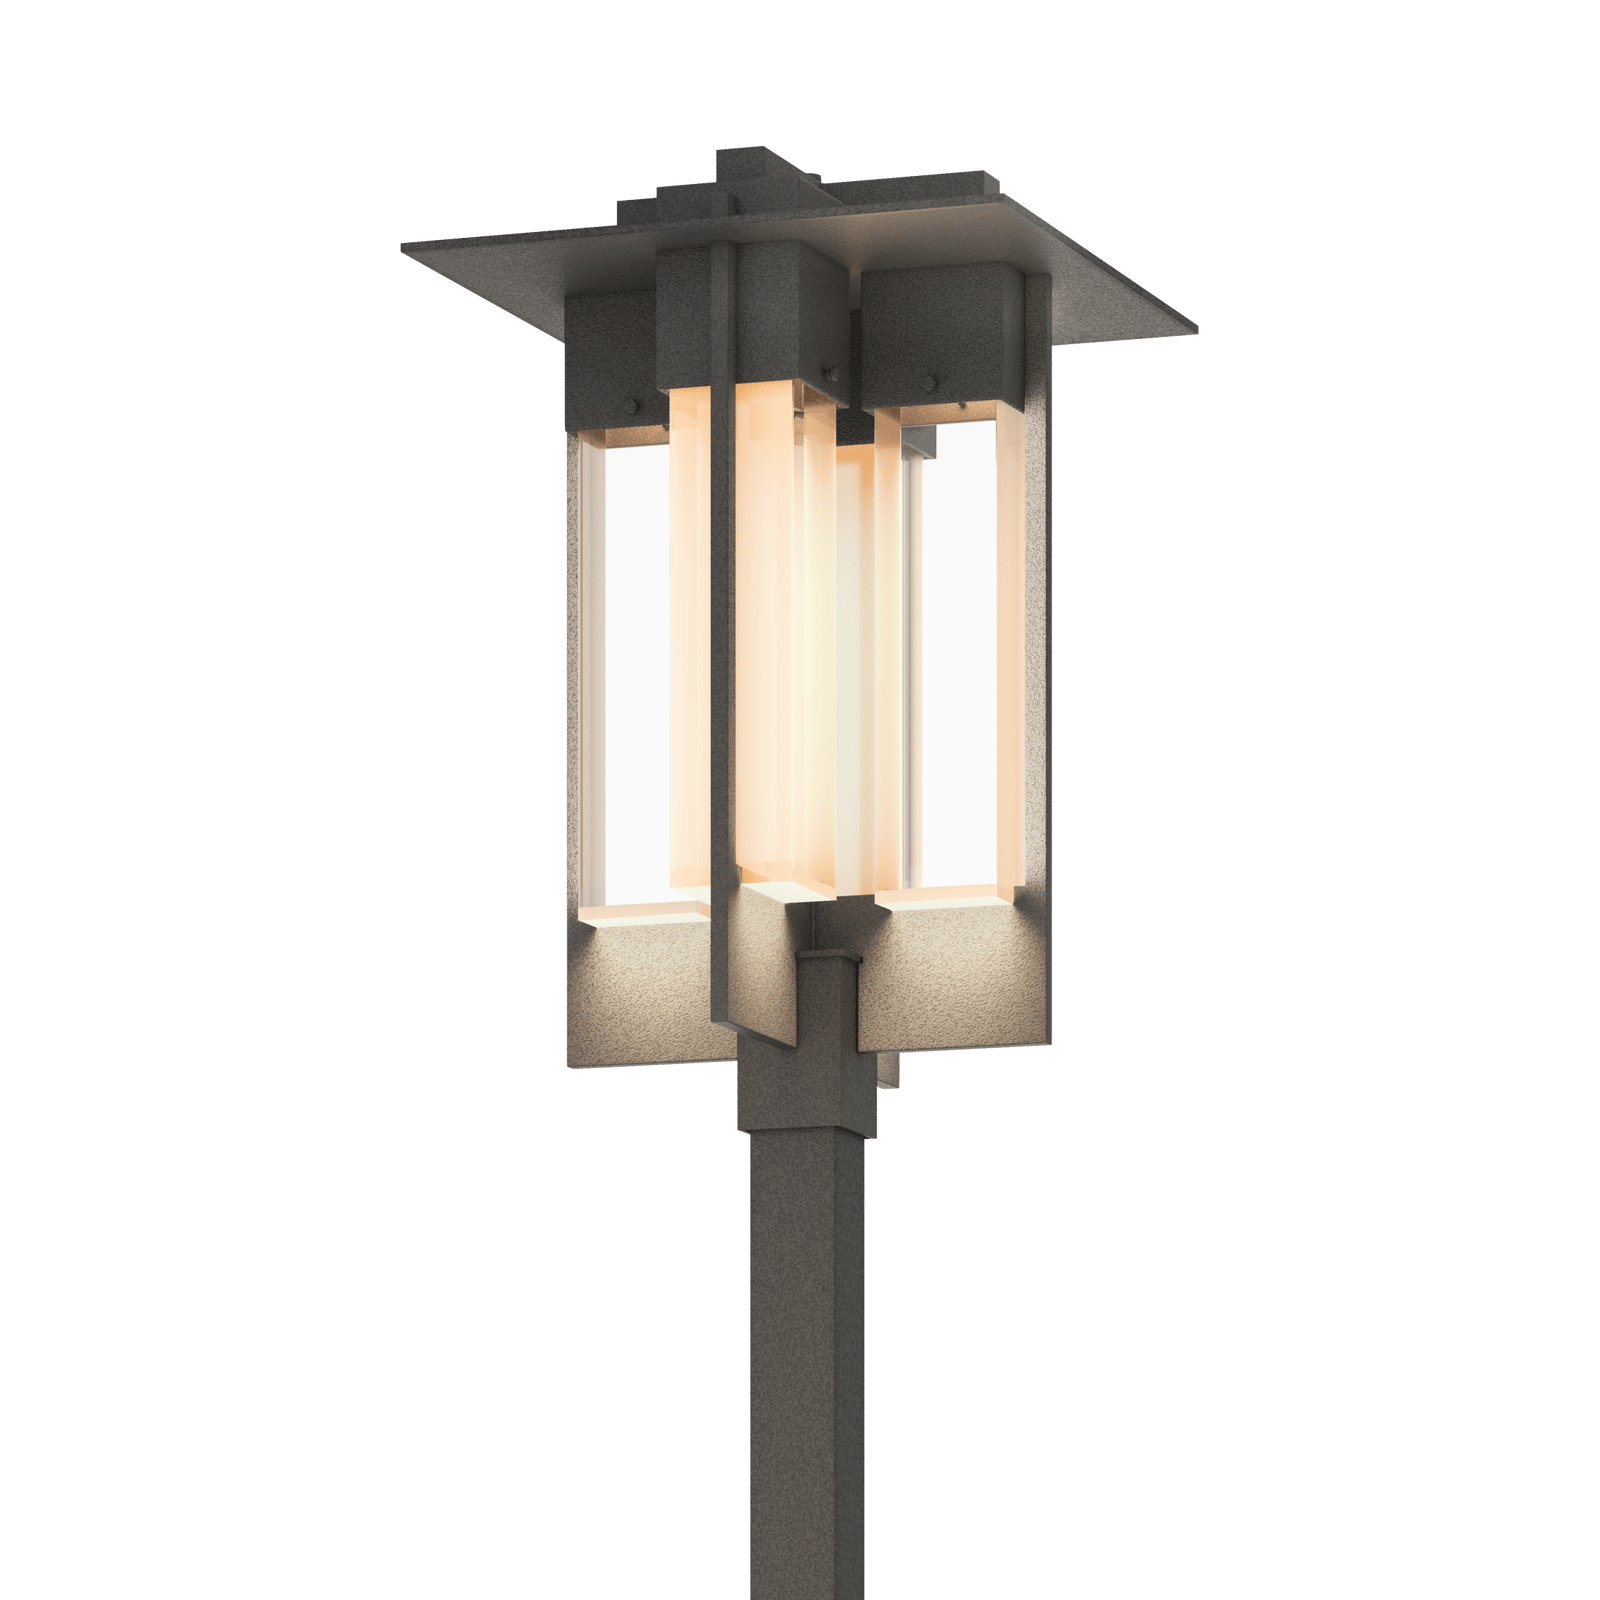 Hubbardton Forge Axis Large Outdoor Post Light Outdoor l Post/Pier Mounts Hubbardton Forge Coastal Natural Iron Clear Glass (ZM) 